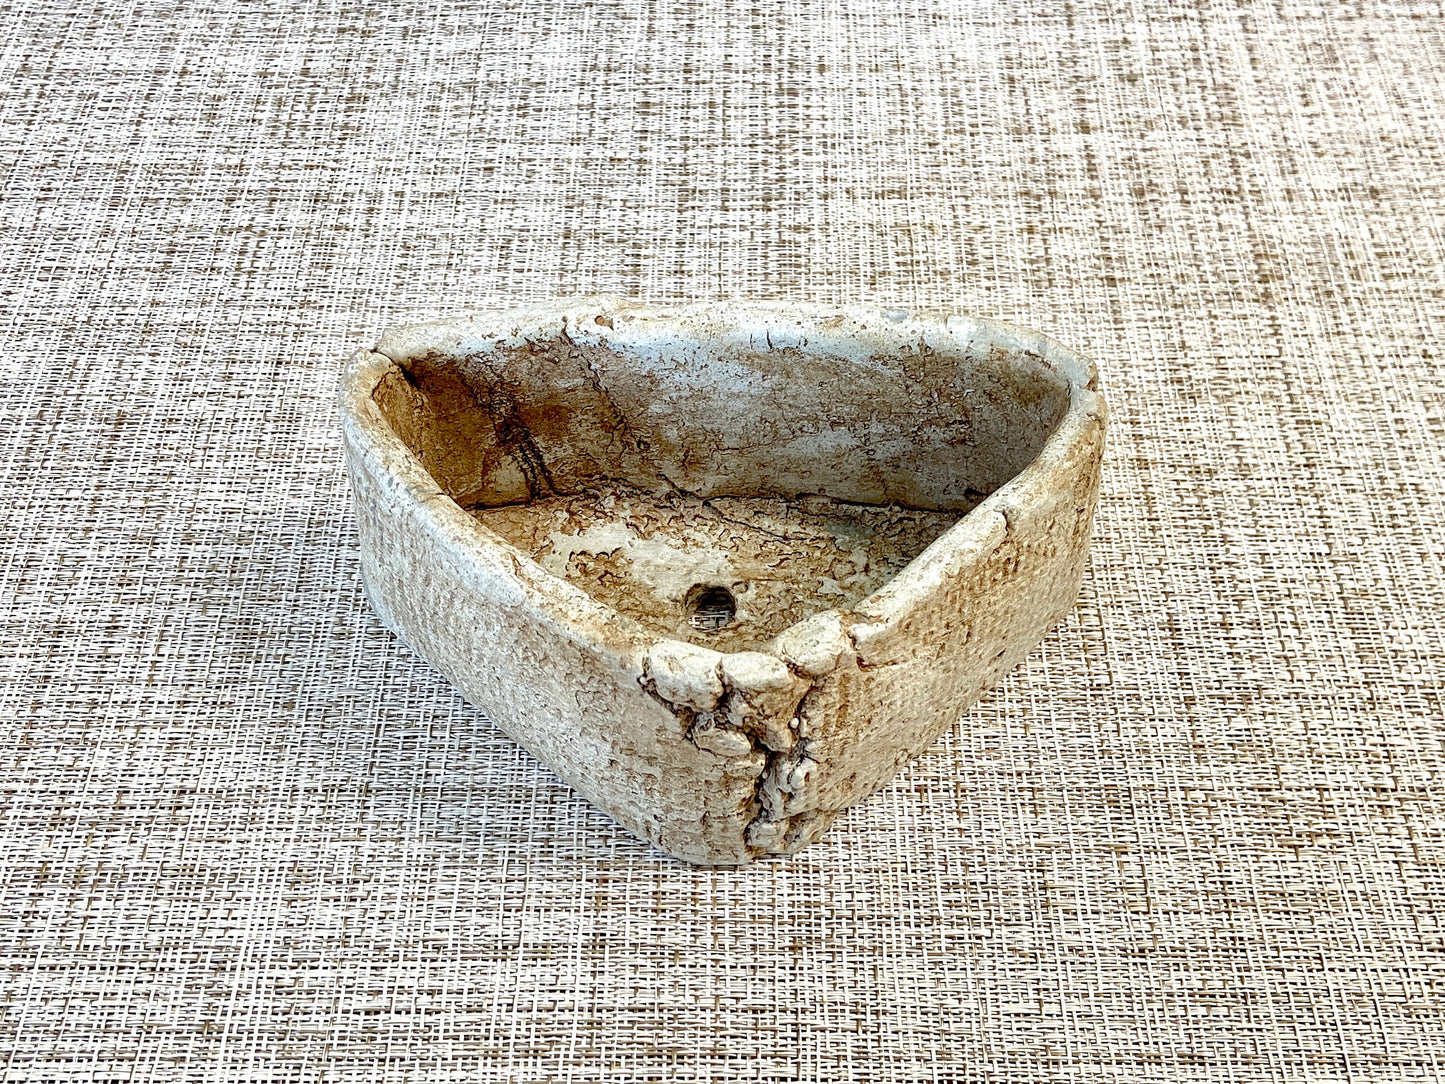 Imitation Stone Pot Made From Cement